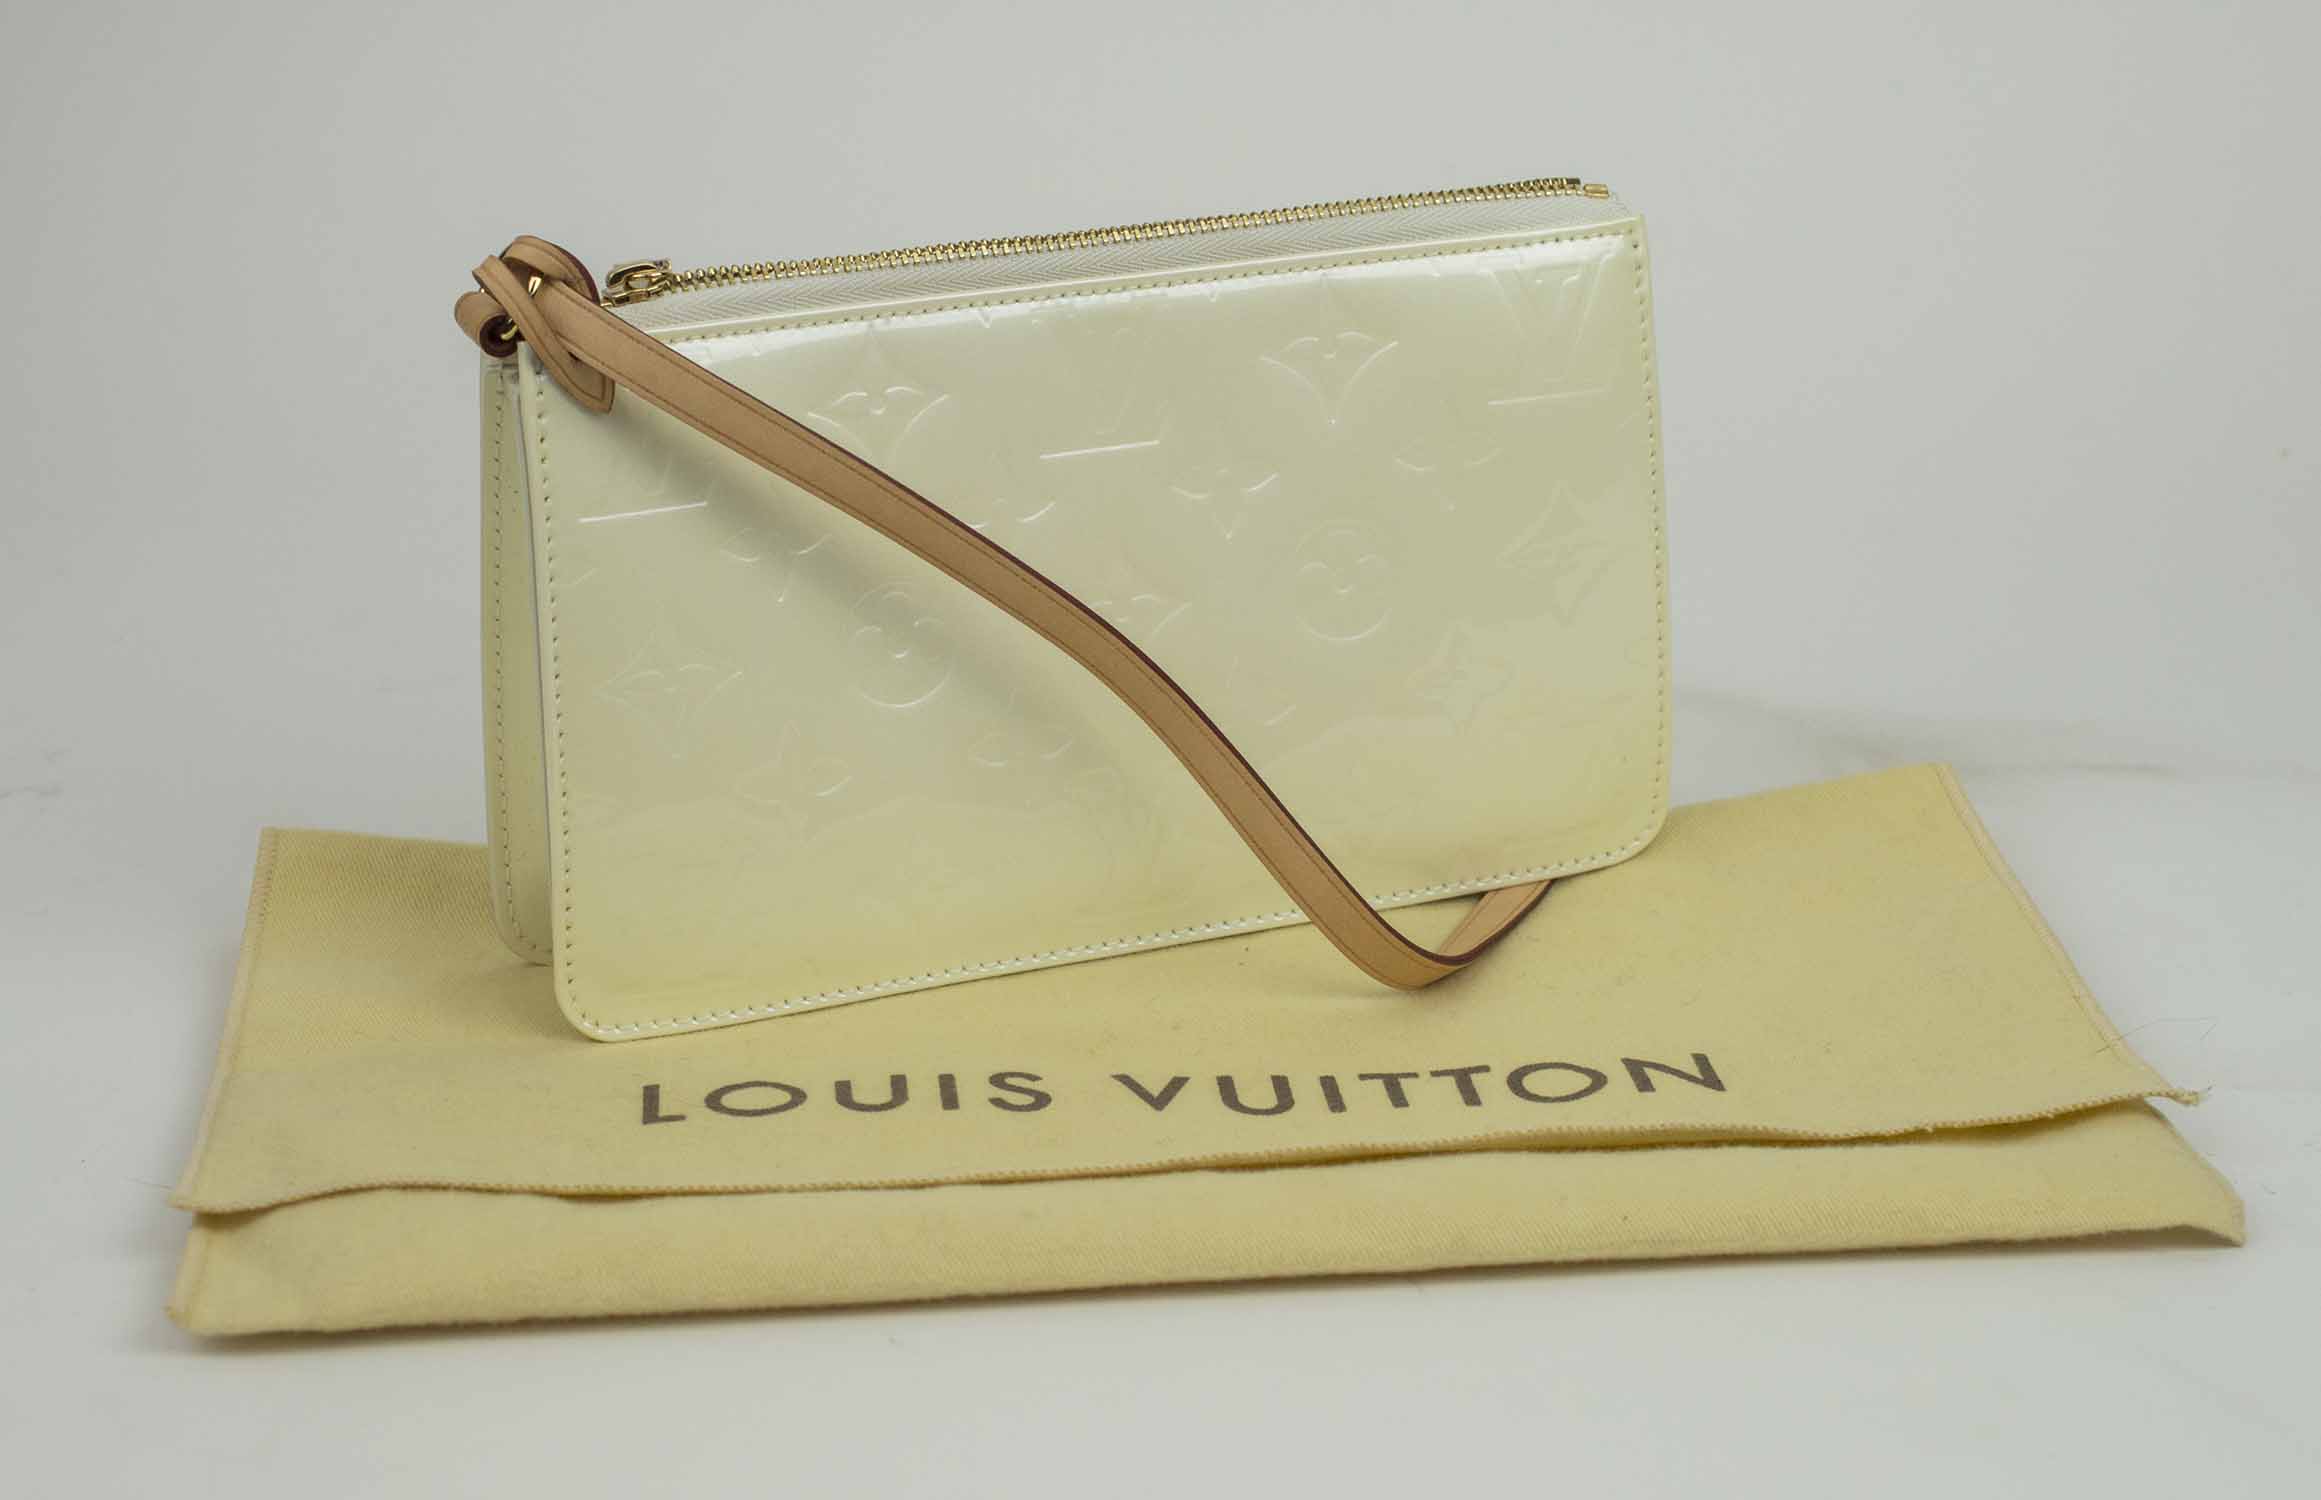 LOUIS VUITTON ACCESSOIRE CLUTCH/WRIST BAG, patent leather with gold tone  hardware, top zip closure, natural leather removable strap, can be worn  around the wrist, with dust bag, 20cm x 12cm H.